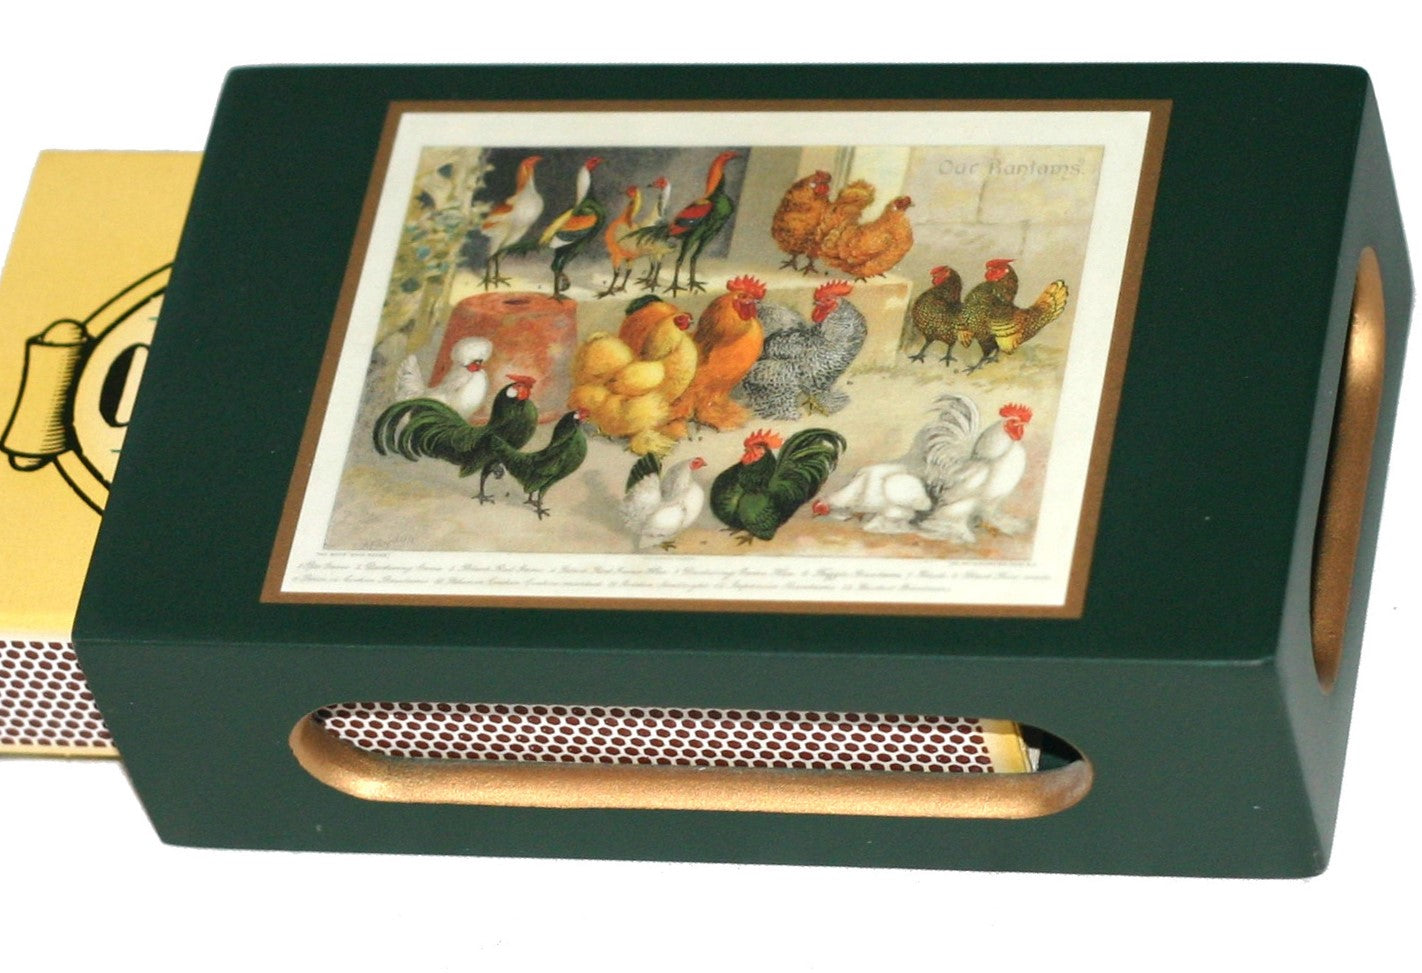 Standard Wooden Matchbox Cover with Matches: Chickens on Dark Green